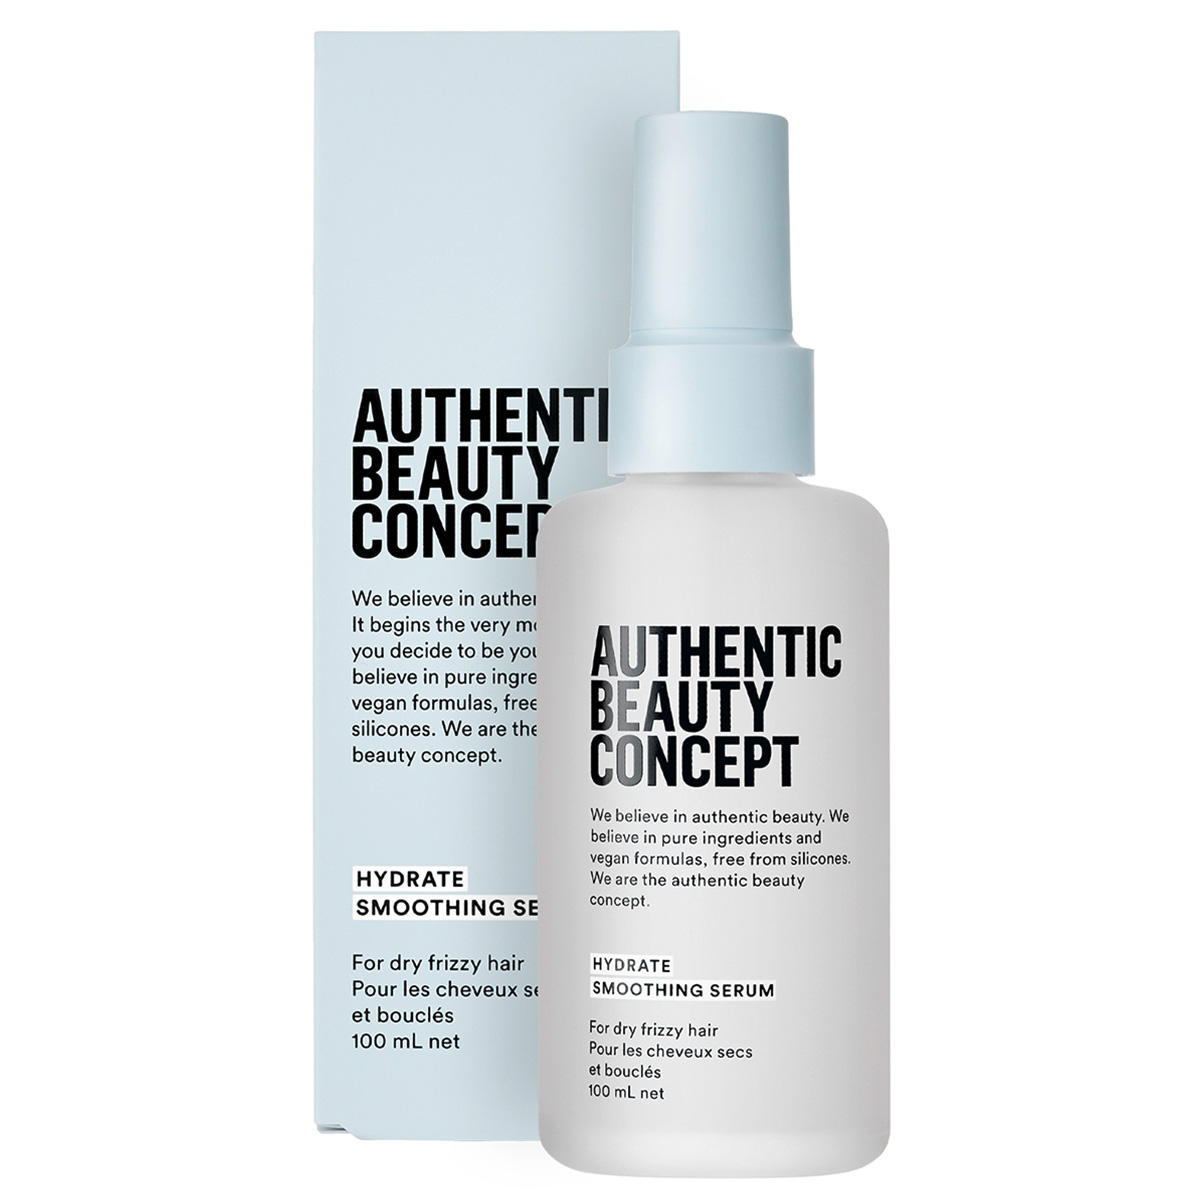 Authentic Beauty Concept Hydrate Smoothing Serum 100 ml - 2